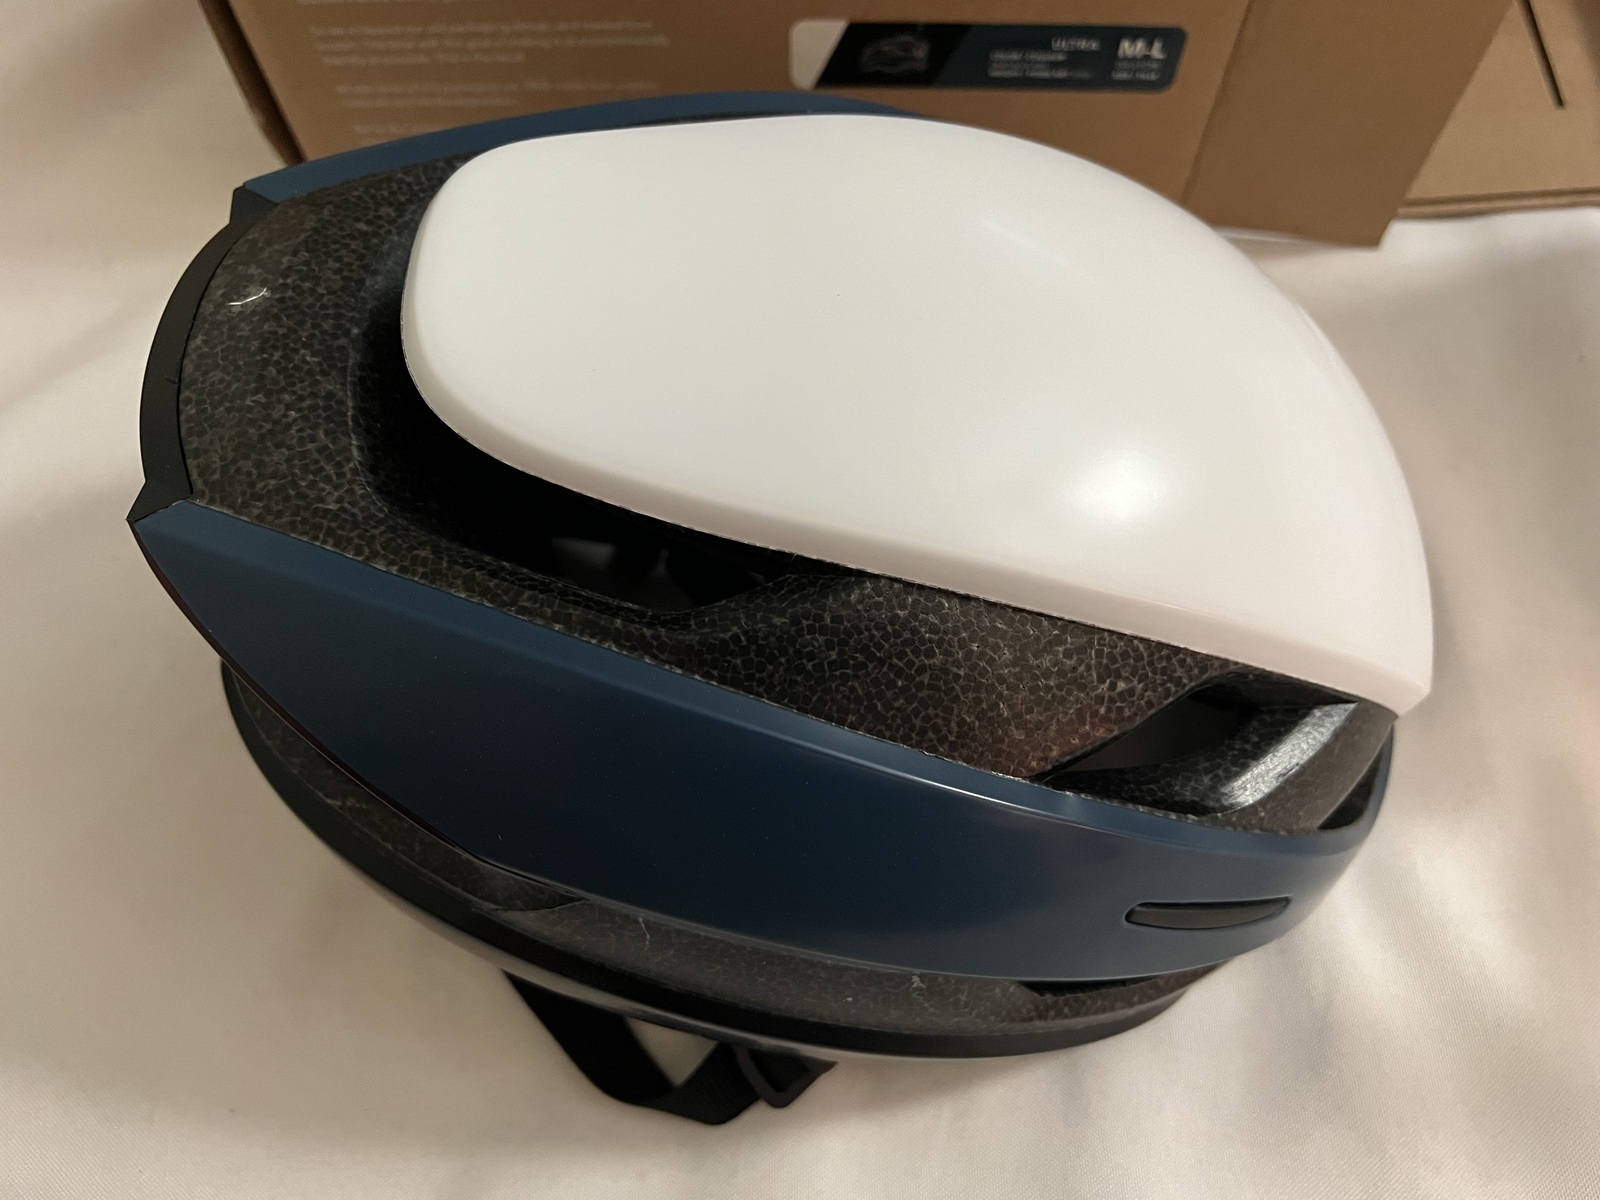 Primary image for Lumos Ultra Helmet, Deep Blue M/L with Remote 